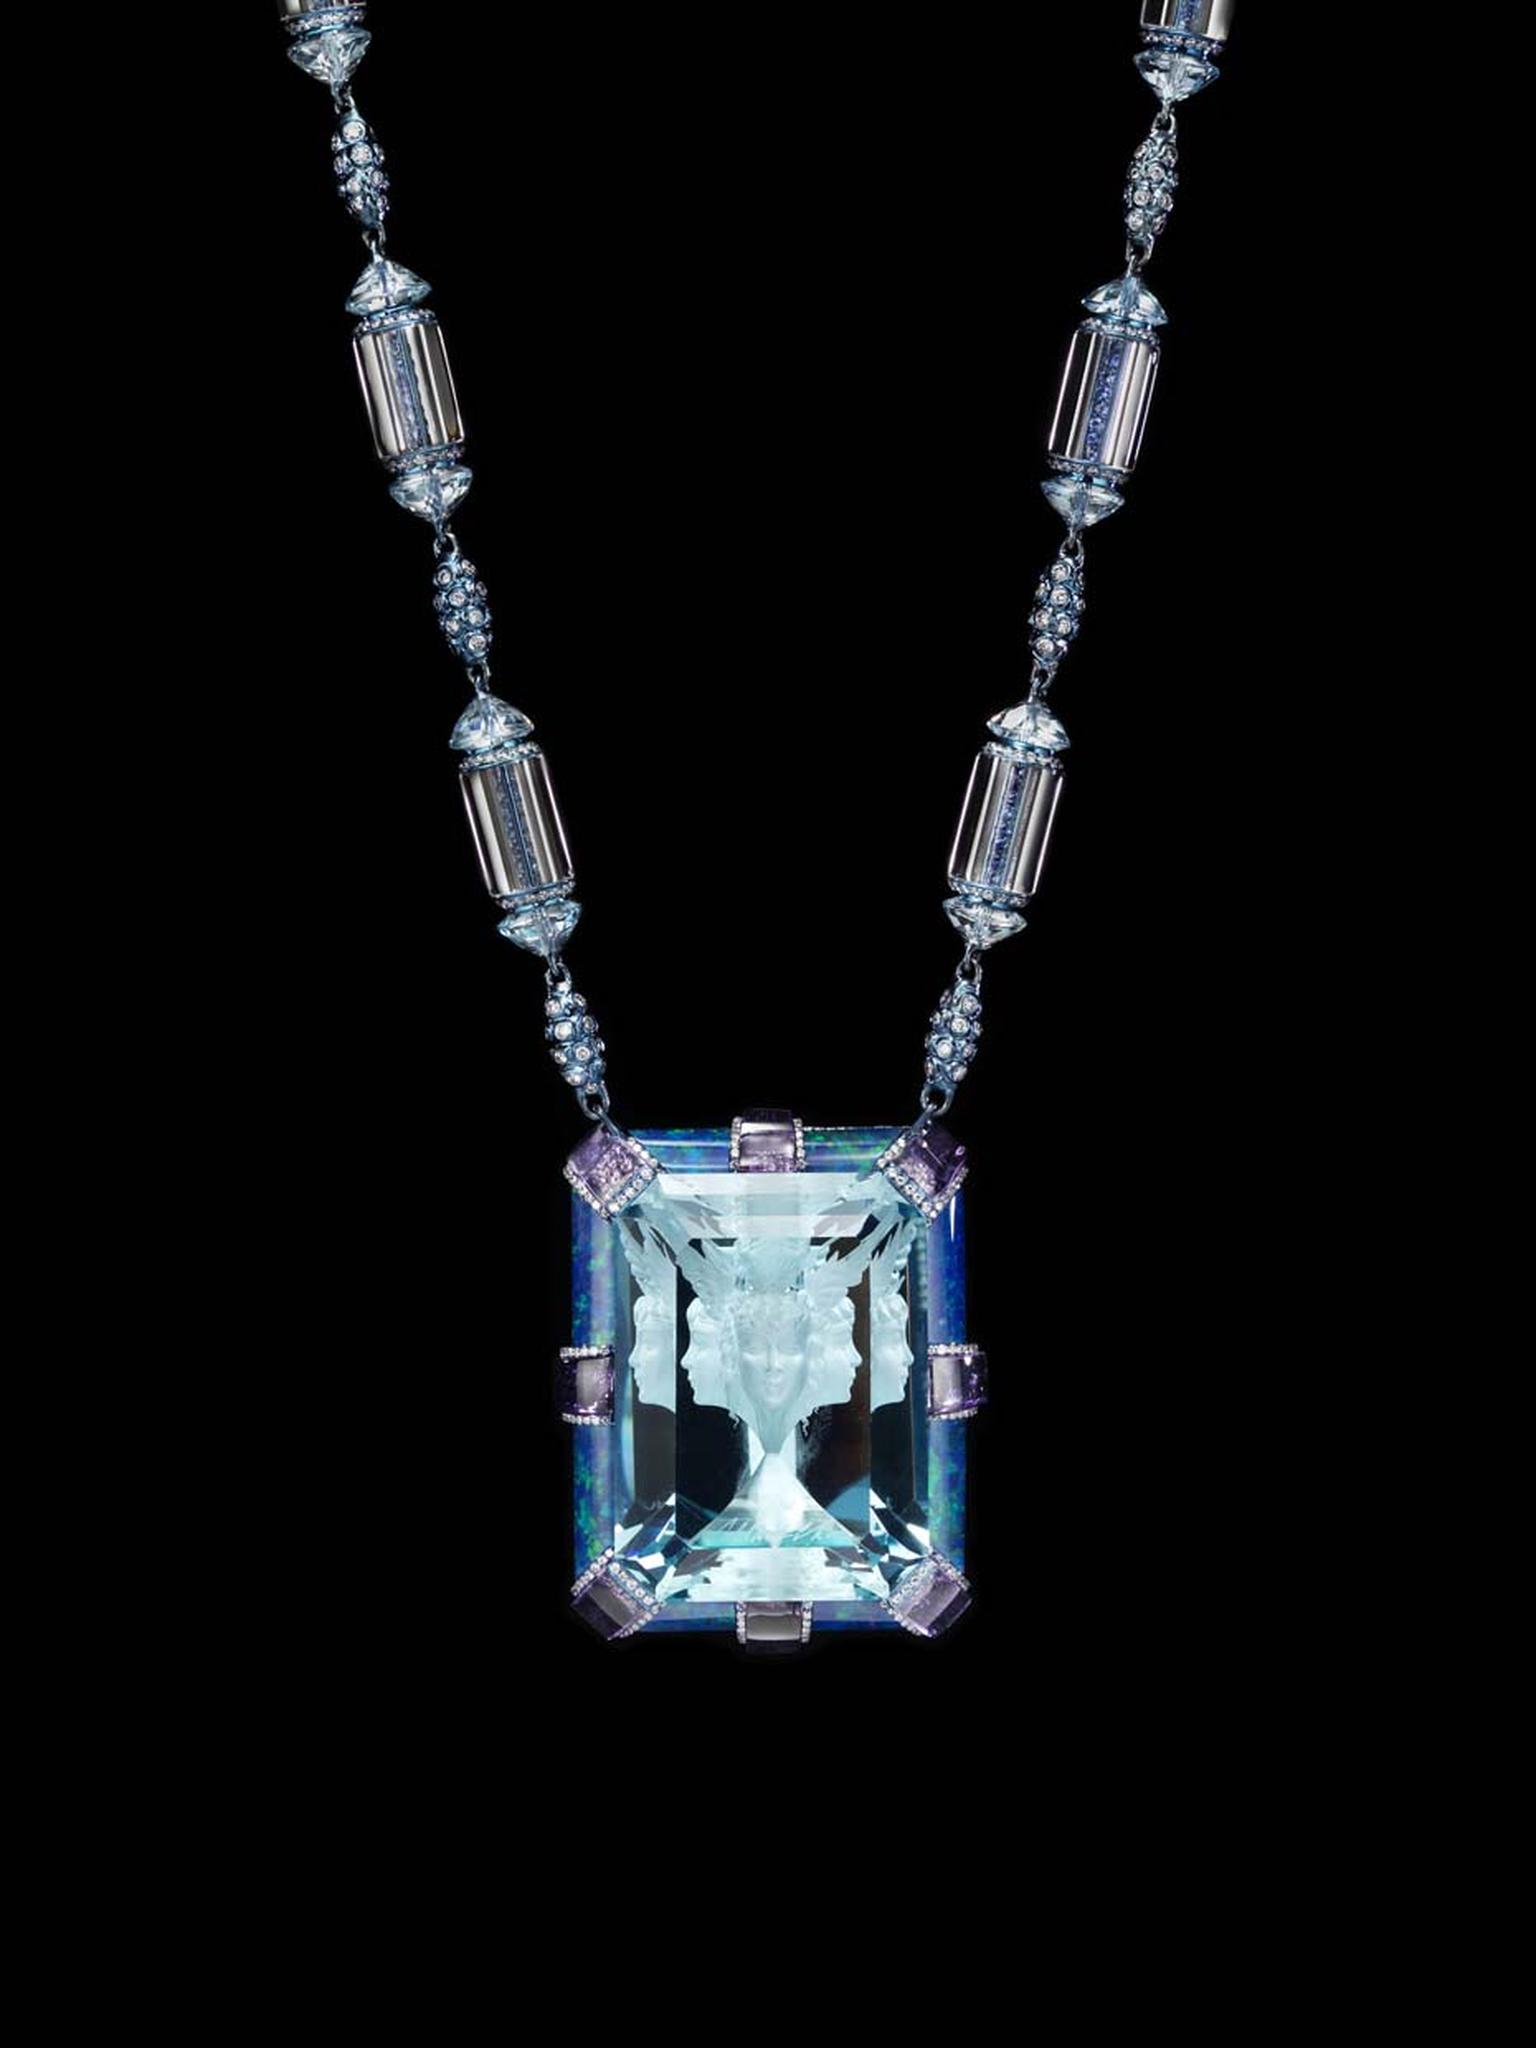 Wallace Chan Now and Always necklace featuring a signature 35.4ct Wallace Cut aquamarine